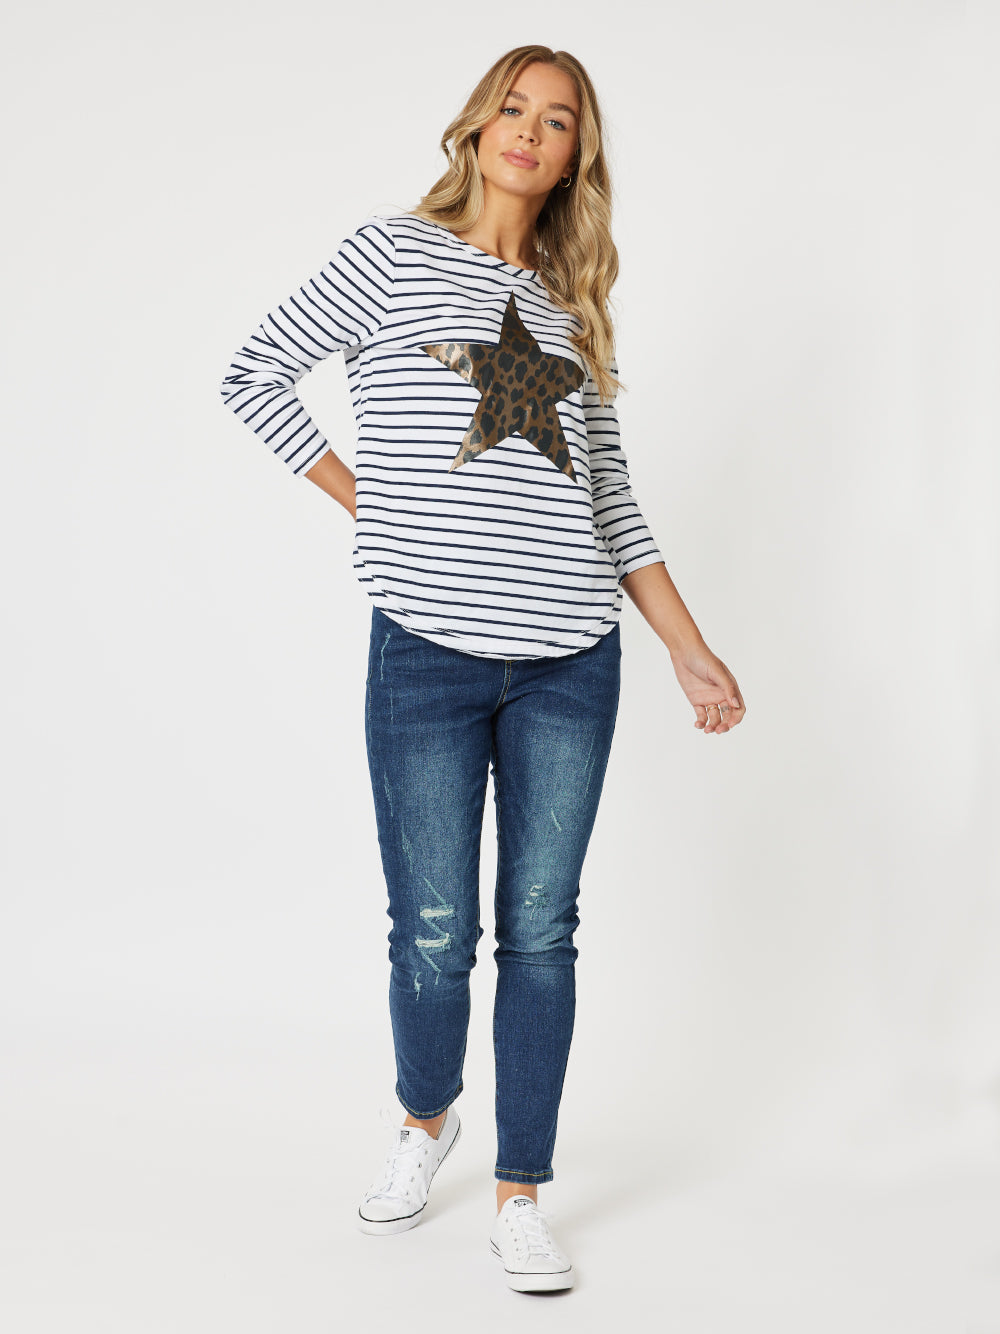 '- Relaxed fit - Round neckline - Long sleeves - Shaped hemline